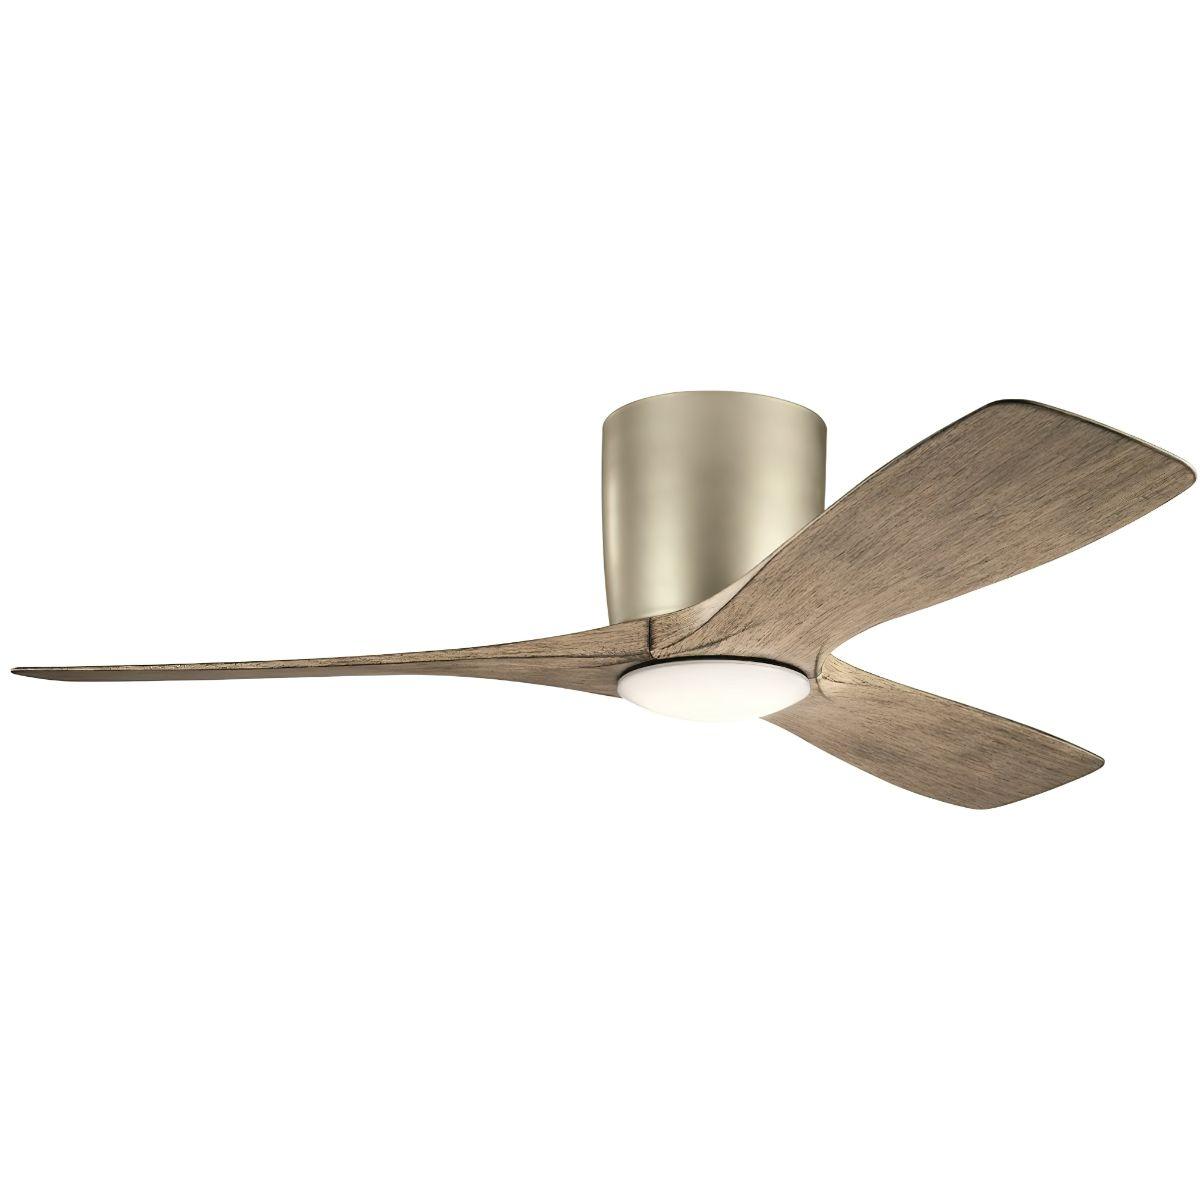 Volos 48 Inch Contemporary Ceiling Fan With Light, Wall Control Included